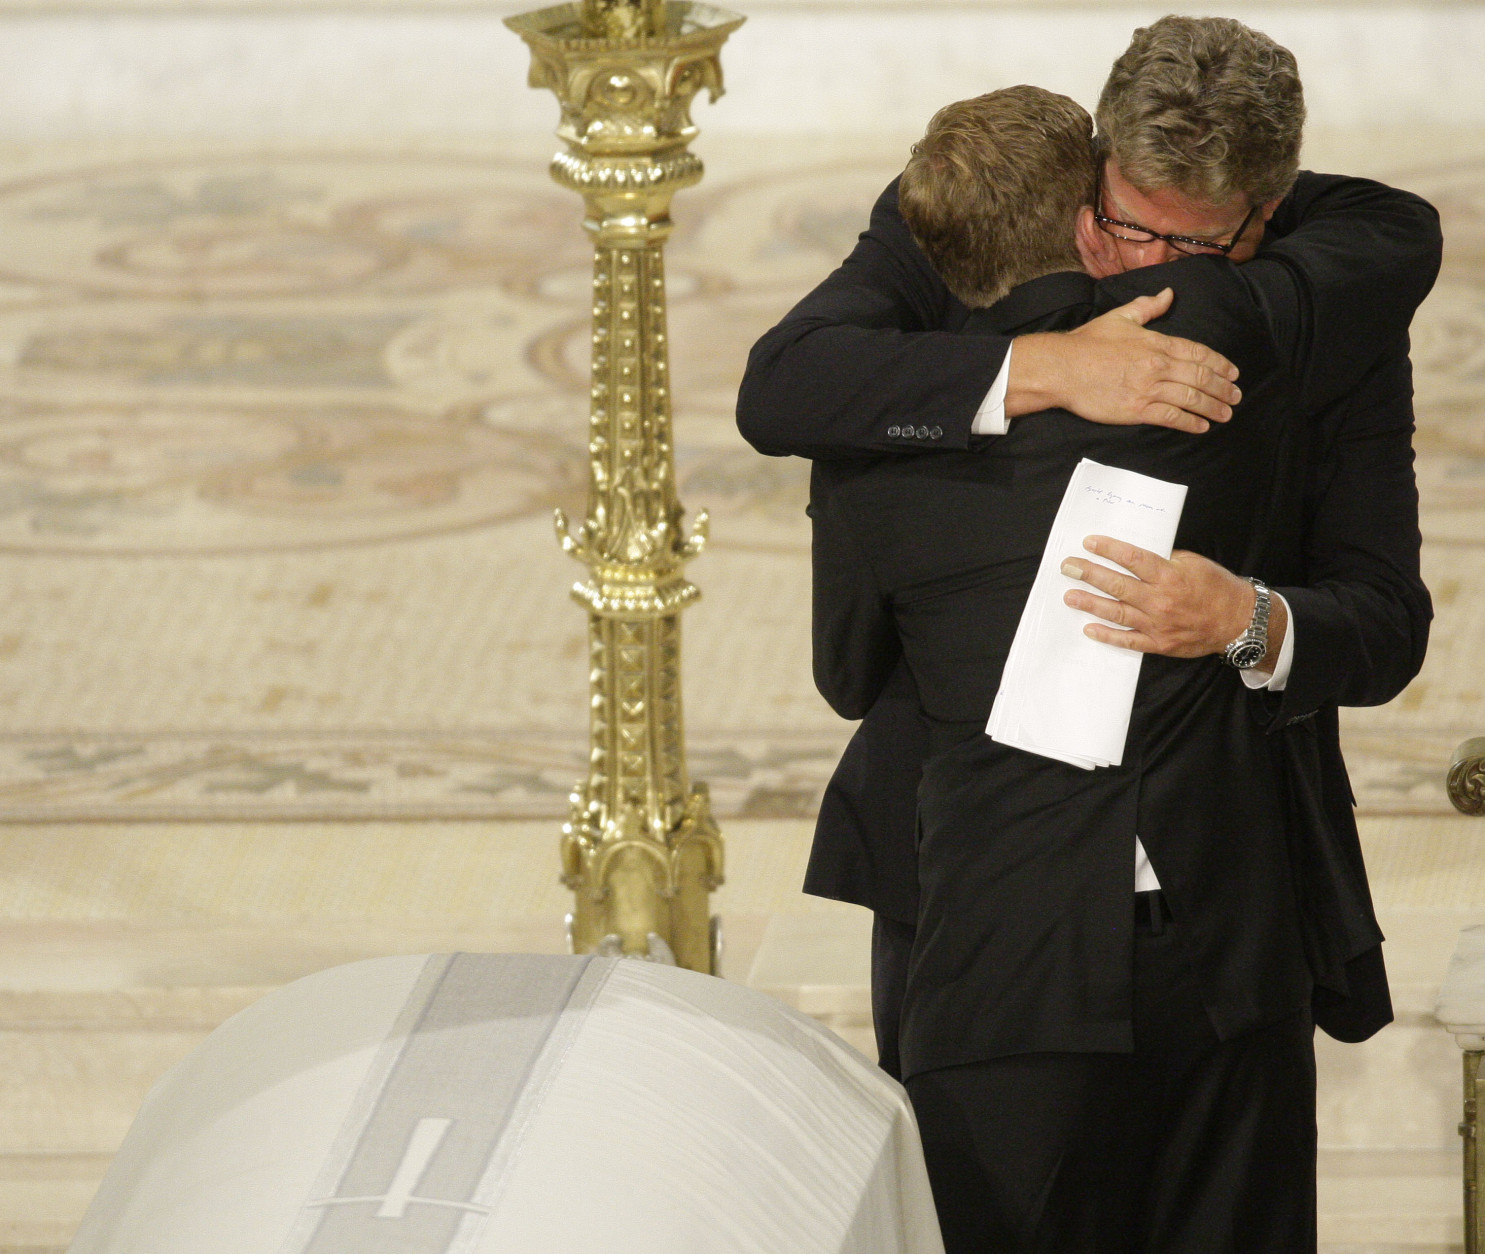 On this date in 2009, Sen. Edward M. Kennedy died at age 77 in Hyannis Port, Massachusetts, after a battle with a brain tumor. Here, Edward Kennedy Jr., hugs his brother Rep. Patrick Kennedy, D-R.I.,at the Roman Catholic Funeral Mass for Sen. Edward M. Kennedy at Our Lady of Perpetual Help Basilica in Boston Saturday, Aug. 29, 2009. (AP Photo/Alex Brandon)